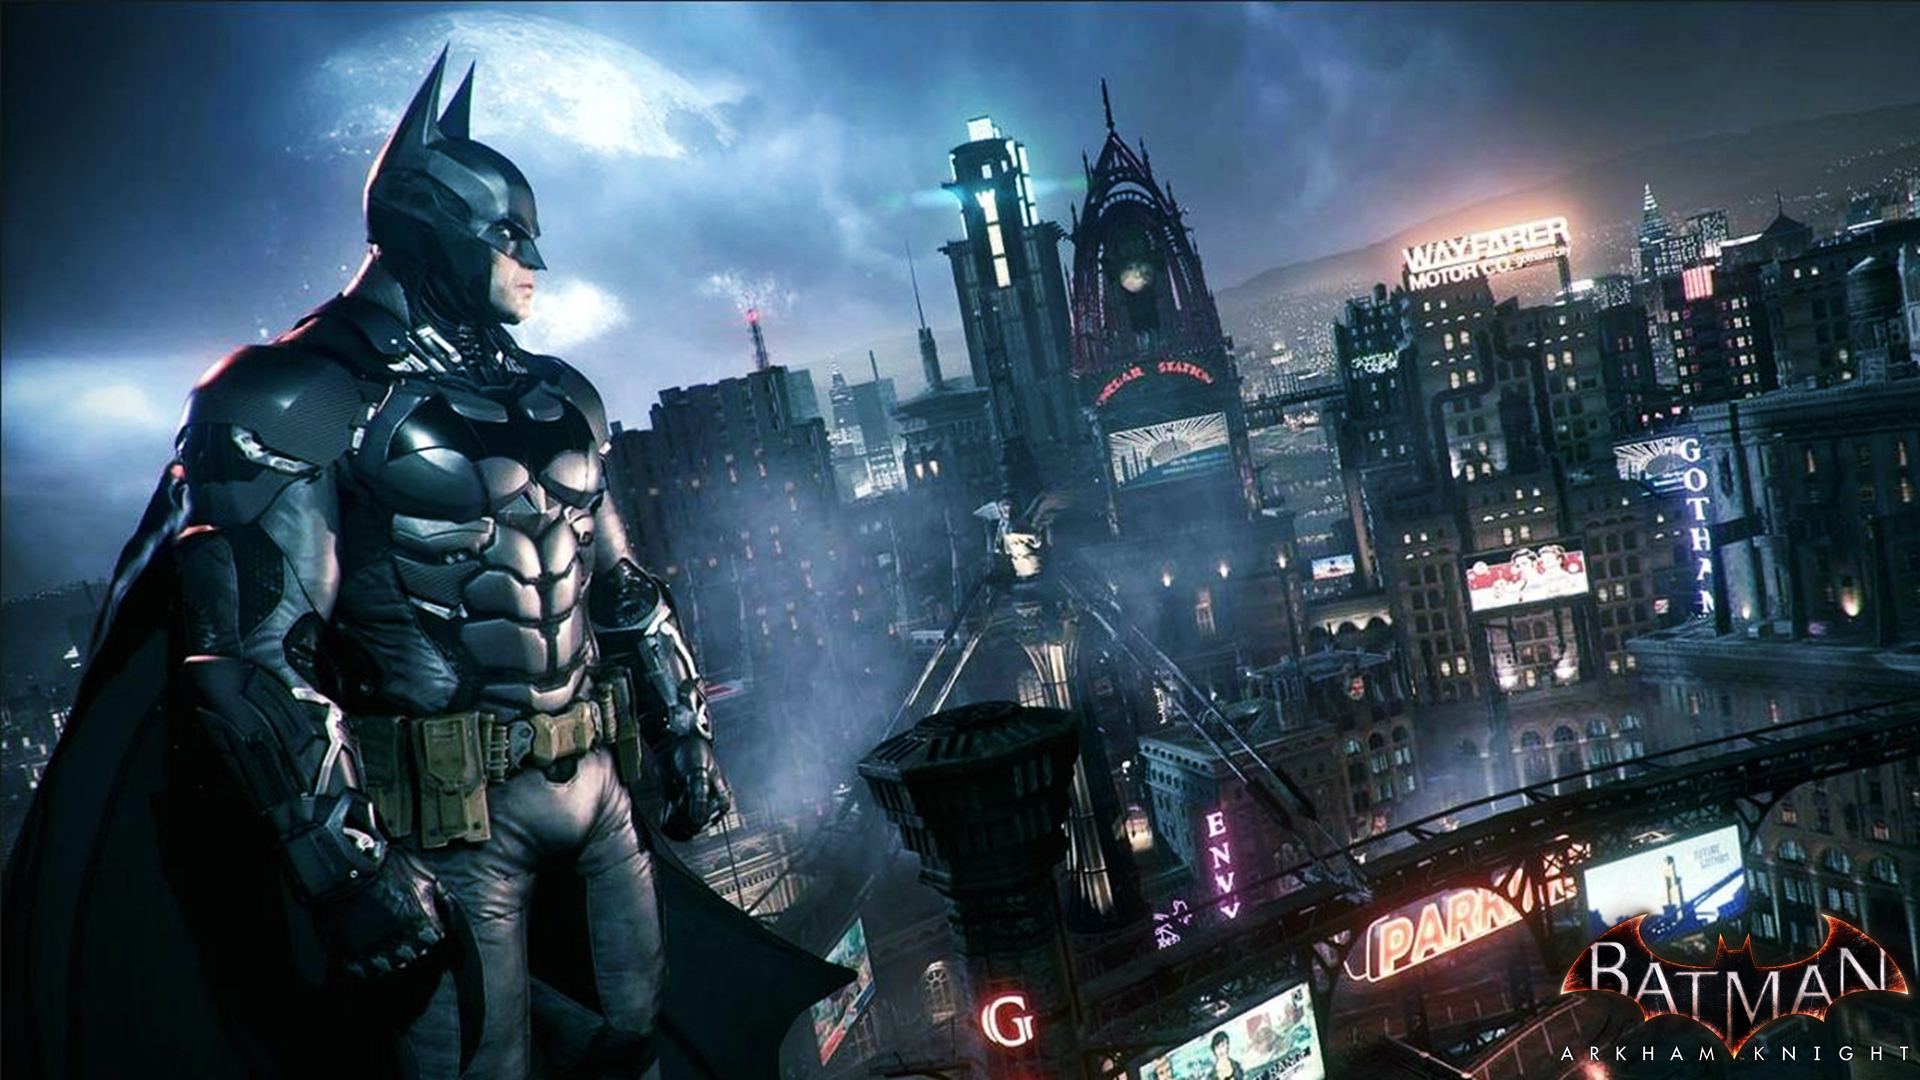  2015 By Stephen Comments Off on 2014 Batman Arkham Knight Wallpaper